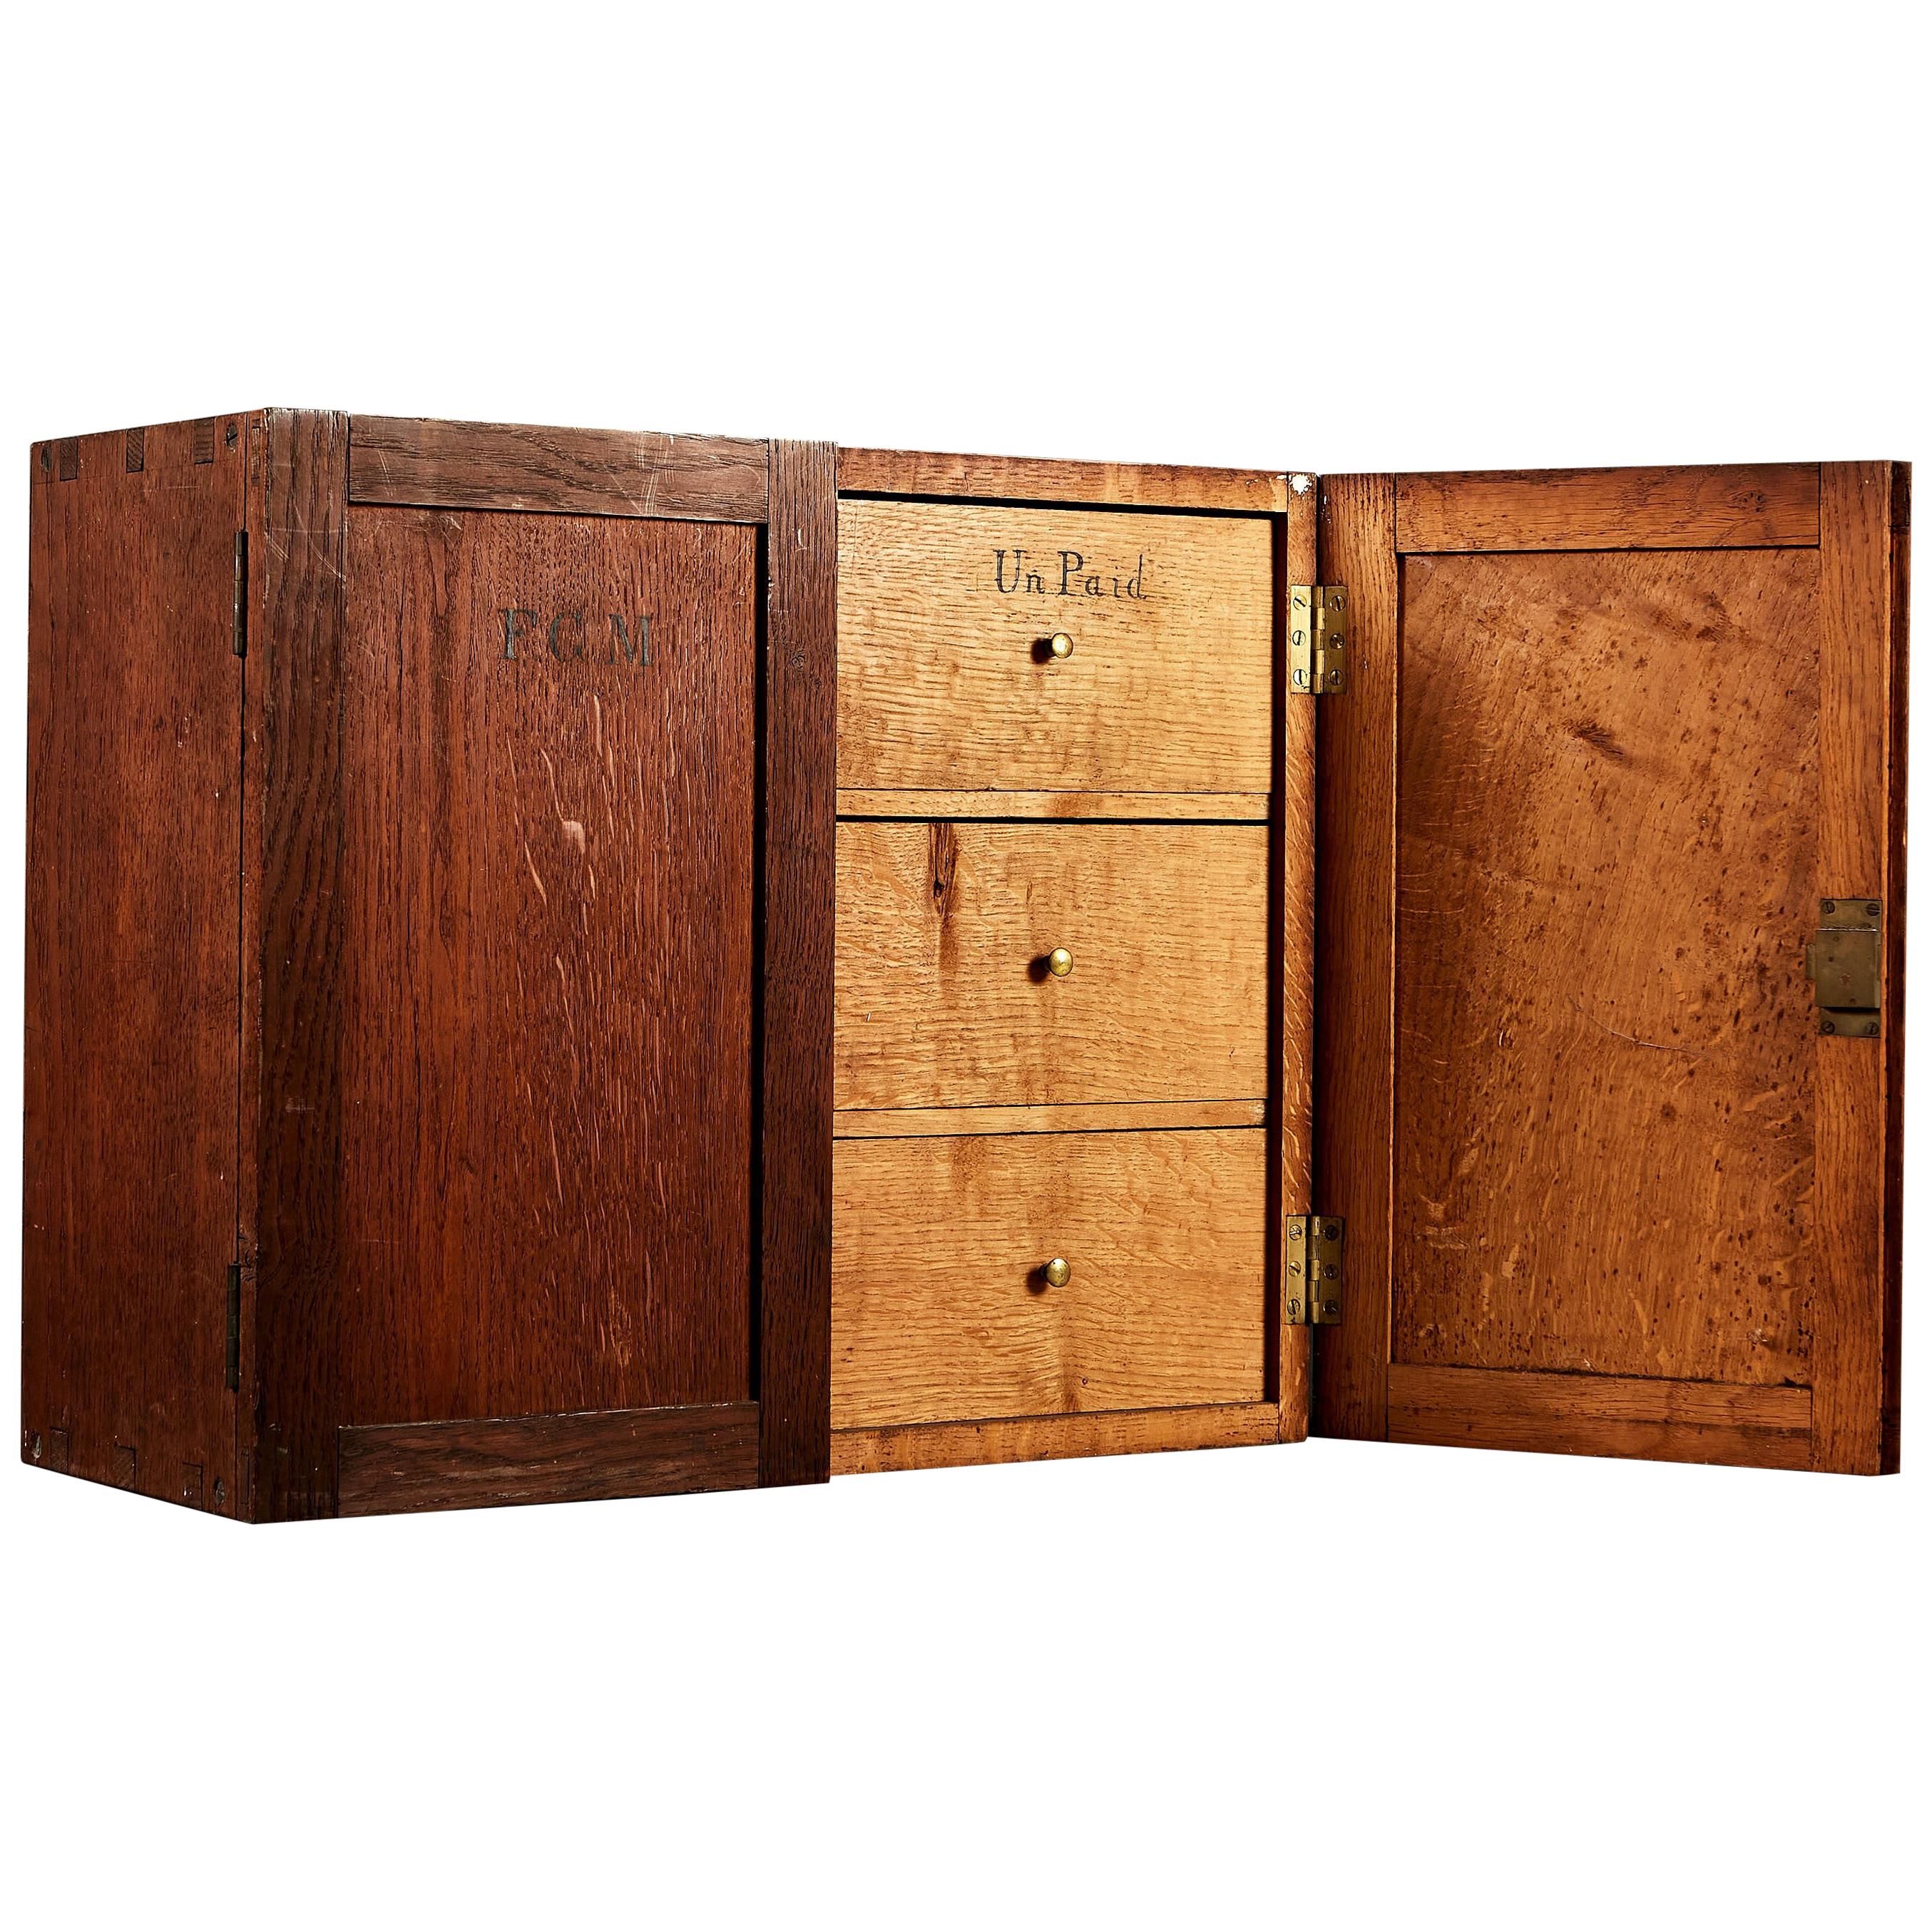 Late 19th Century Estate Filing Cabinet